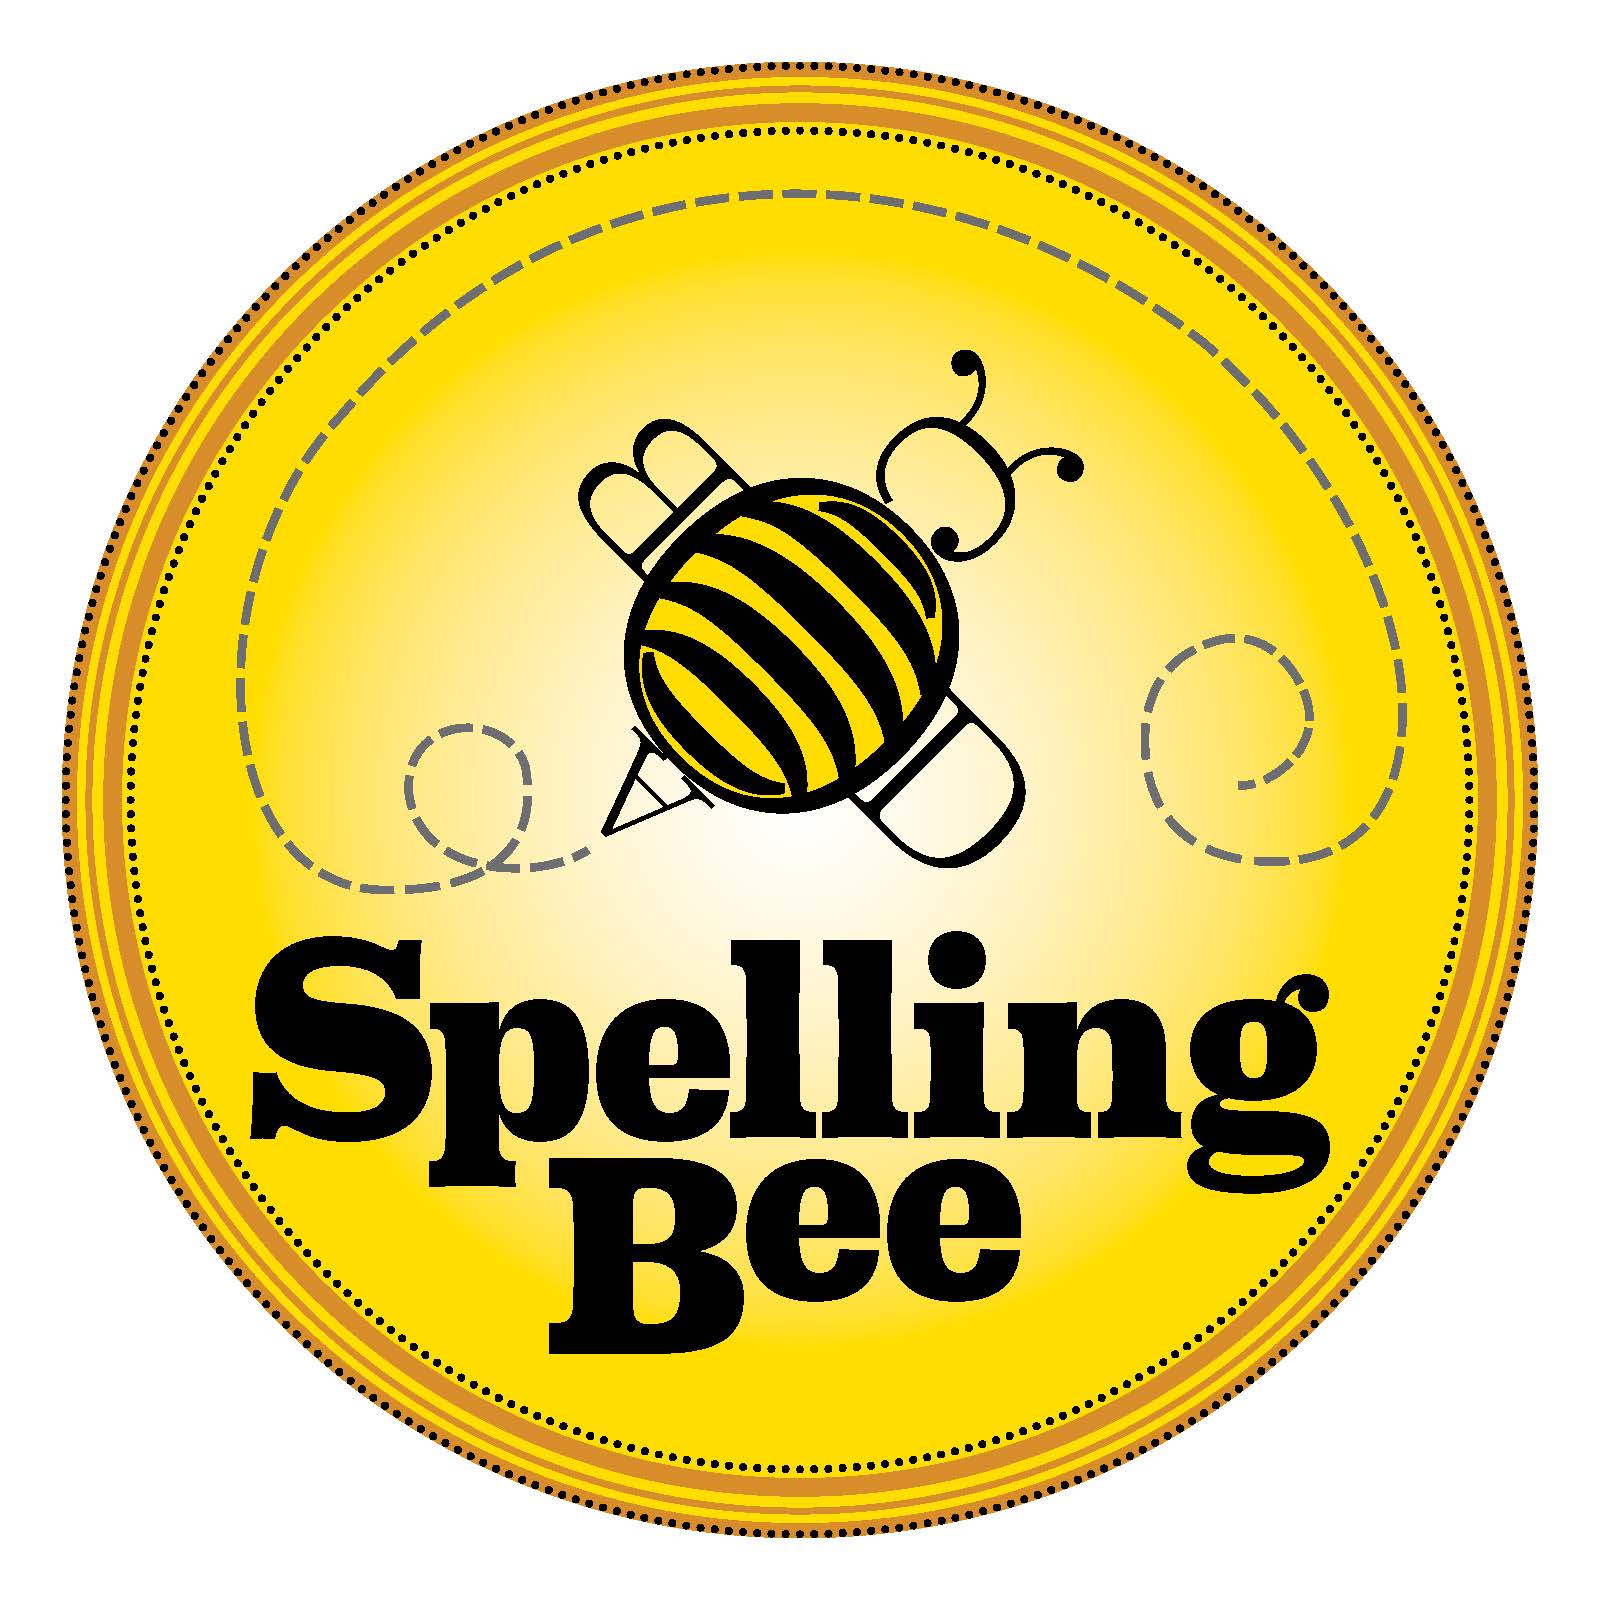 Spelling Bee Free Clipart Fre